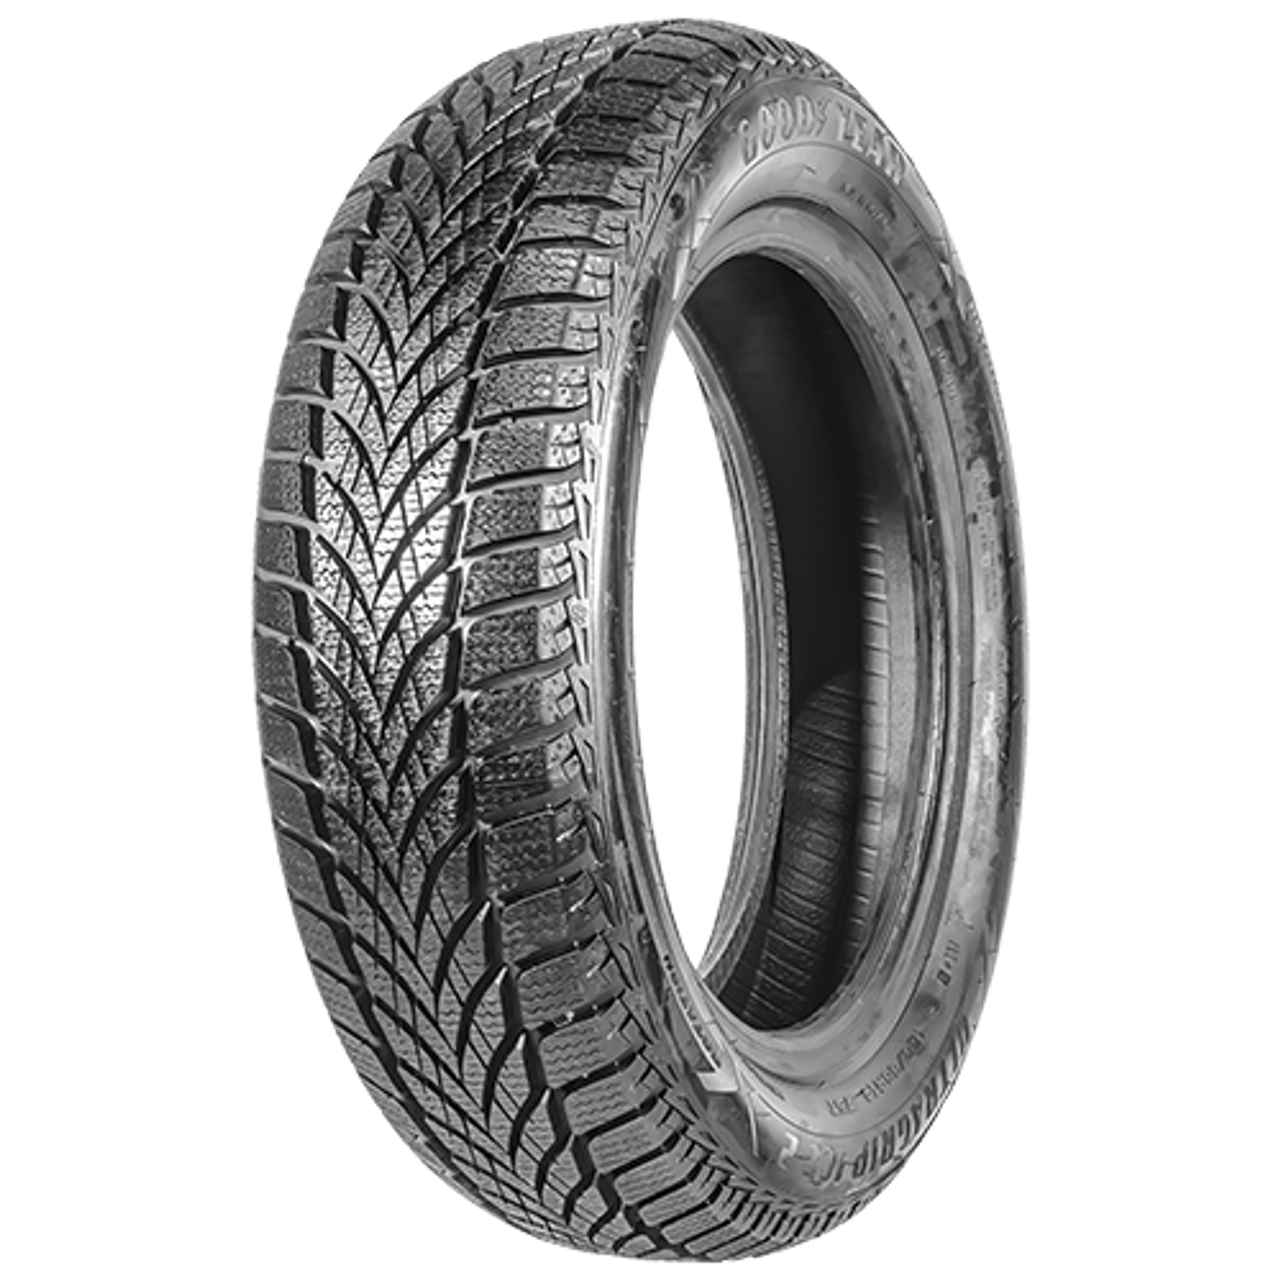 GOODYEAR ULTRAGRIP ICE 2 195/65R15 95T NORDIC COMPOUND BSW